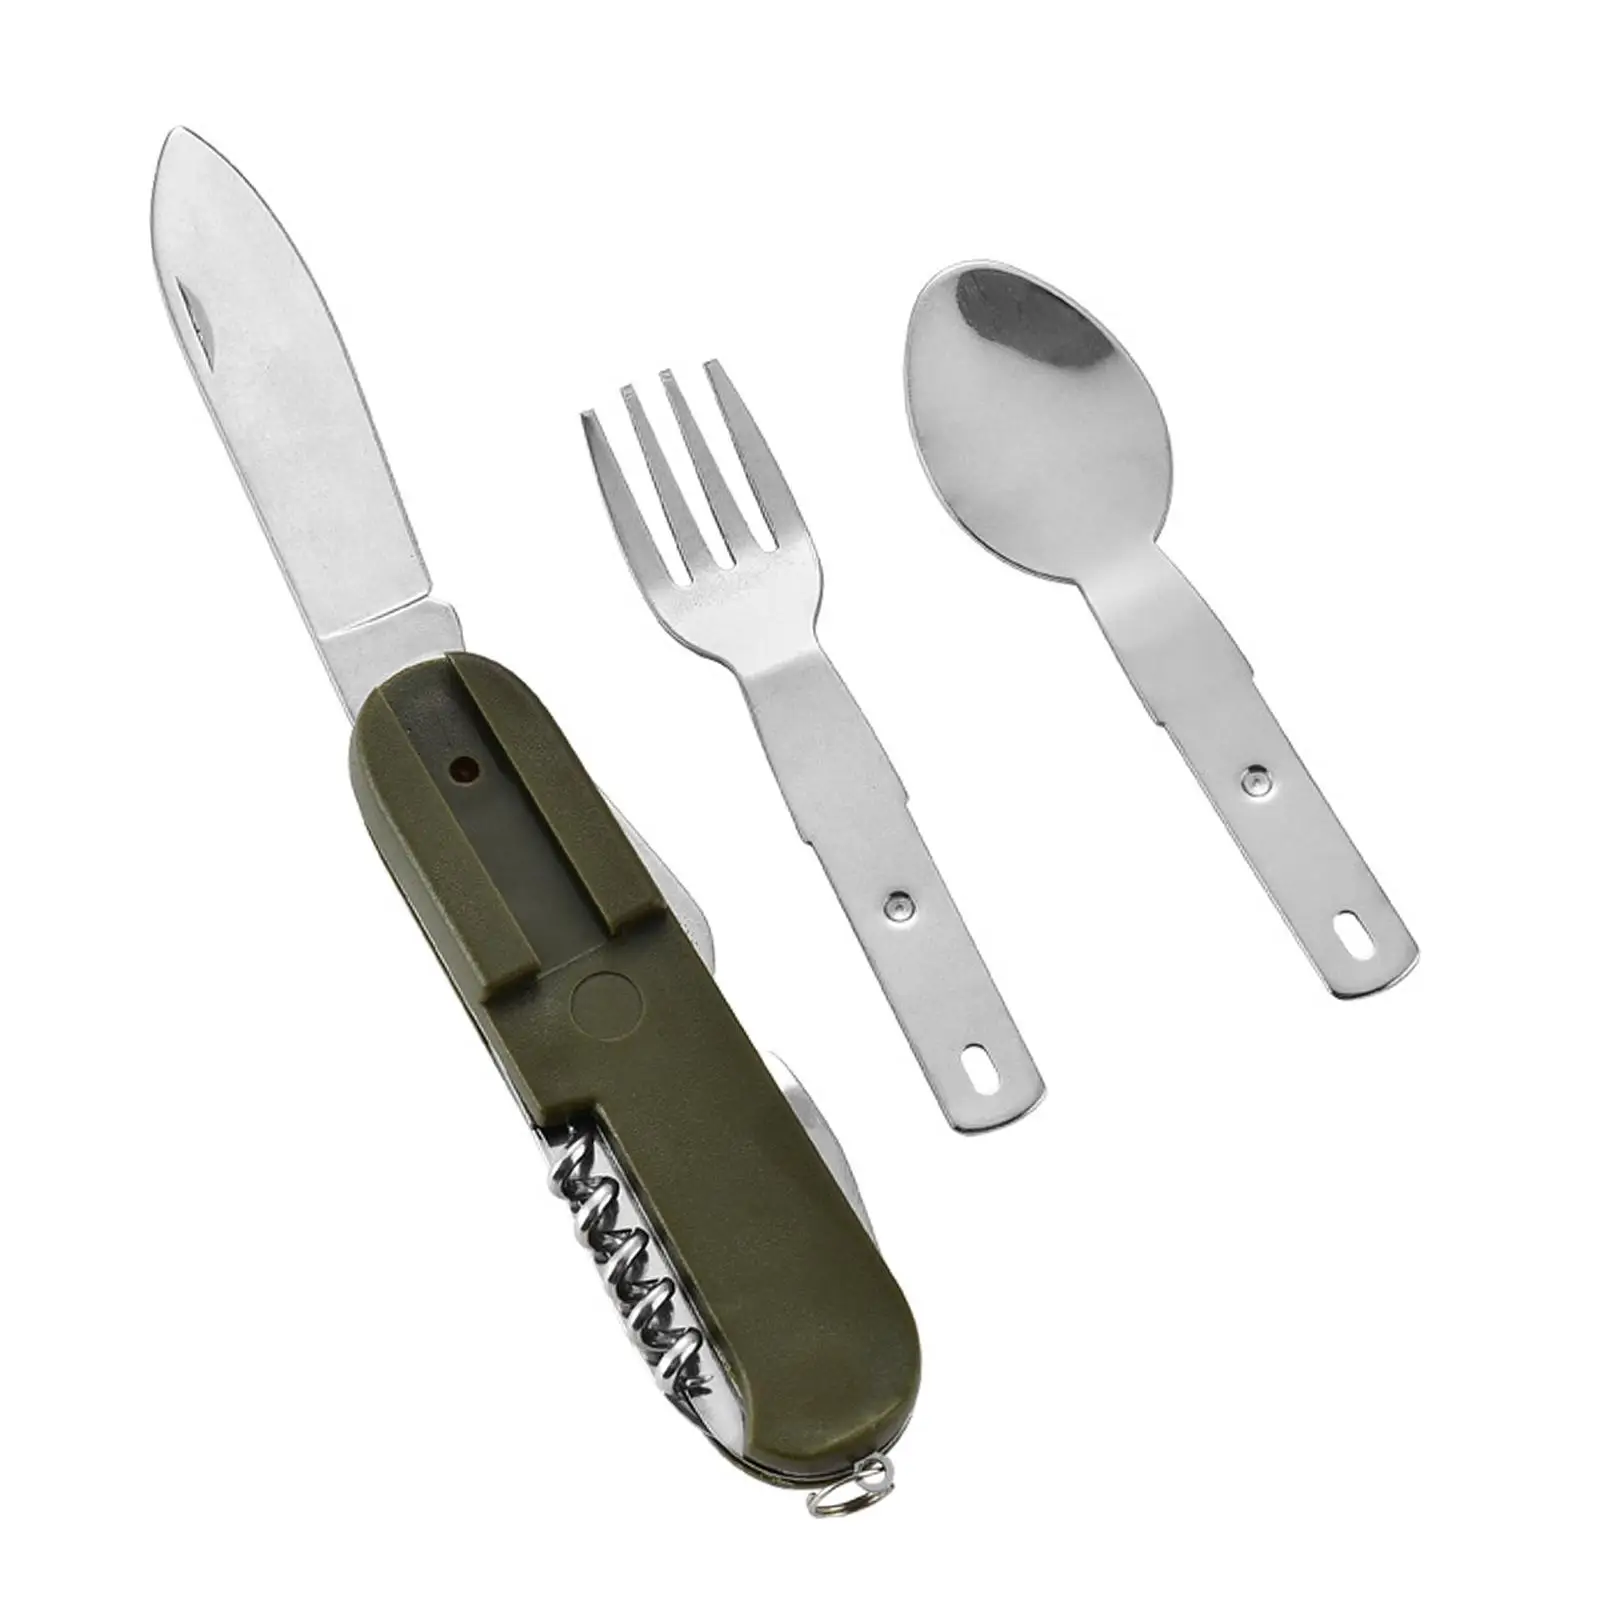 Camping Utensil Stainless Steel Spoon Fork Knife Set Portable Compact Multi Tool for Travel Backpacking BBQ with Carrying Bag